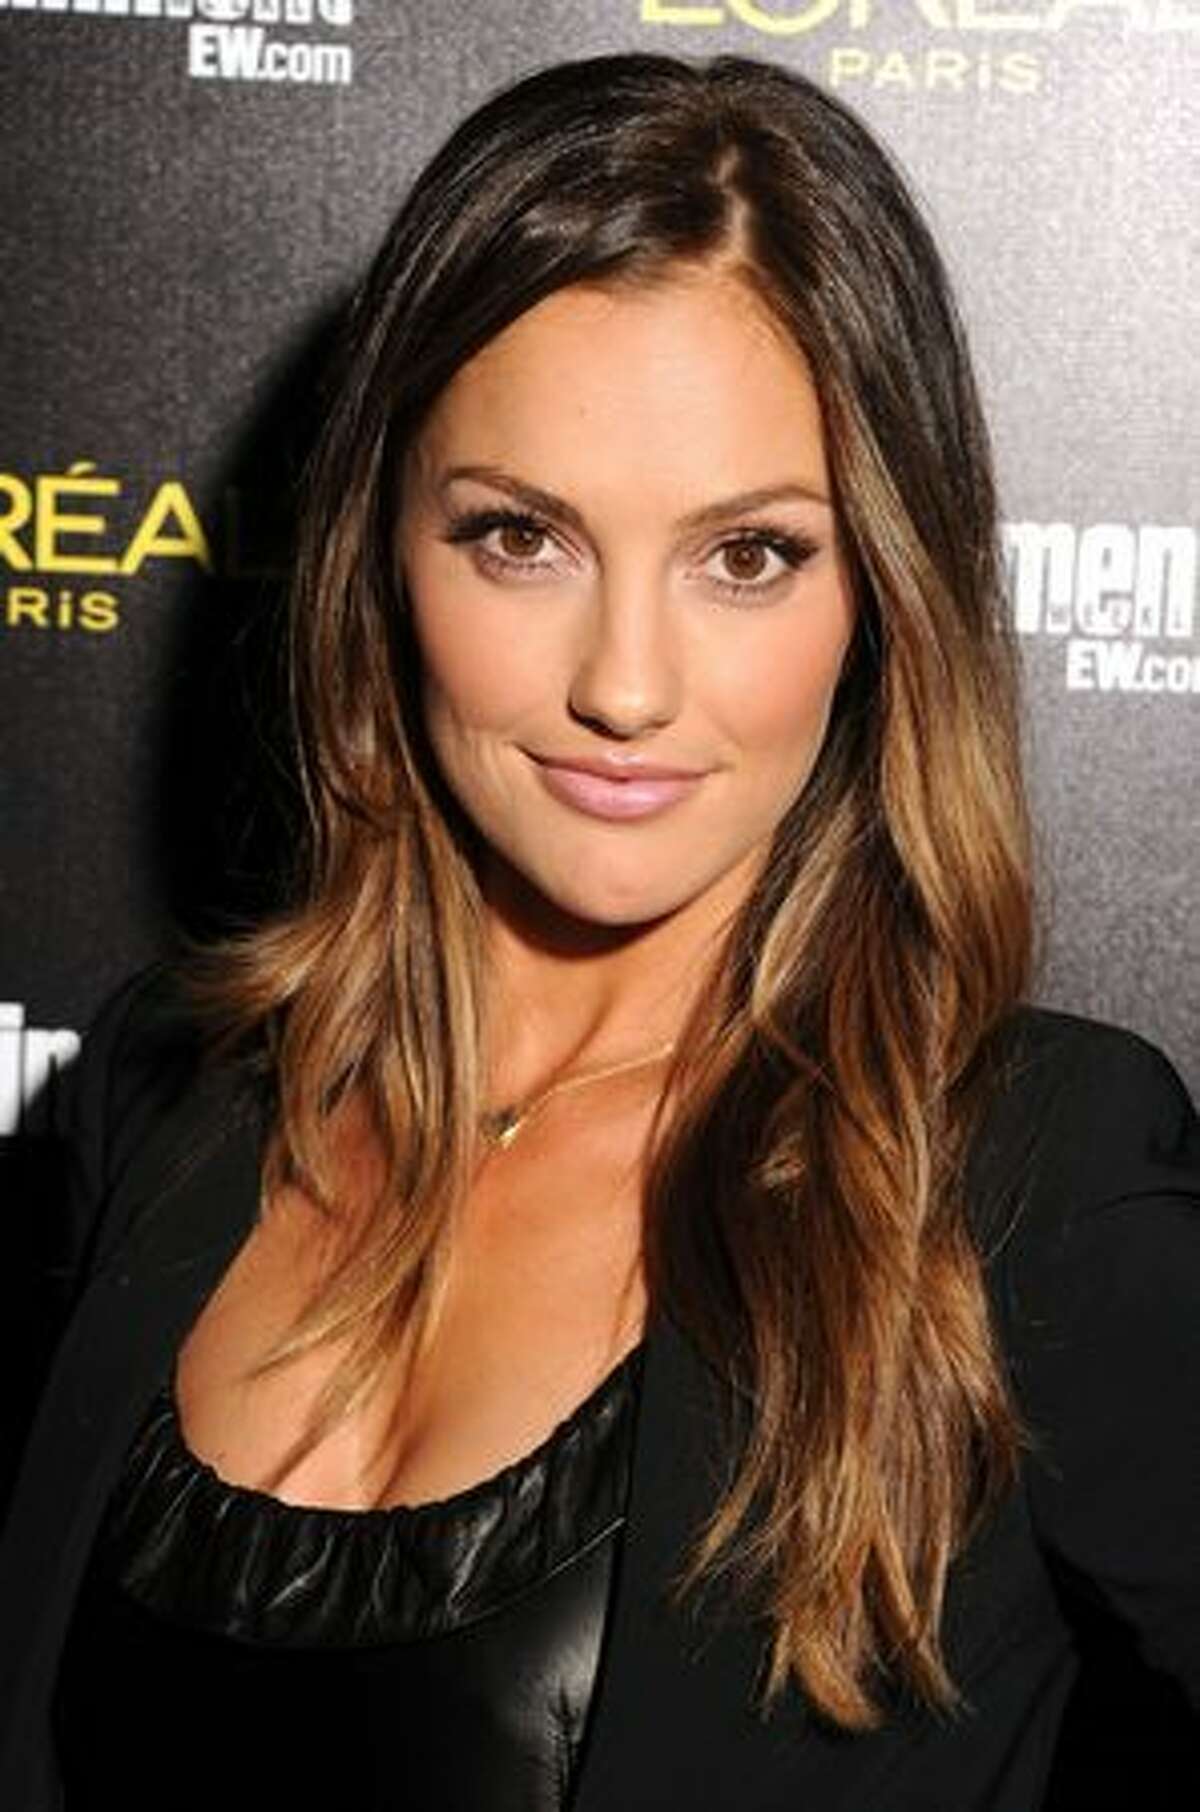 Actress Minka Kelly arrives at Entertainment Weeklyâ€™s celebration honoring the 17th Annual Screen Actors Guild Awards nominees hosted by Jess Cagle and presented by Lâ€™Oreal Paris at Chateau Marmont in Los Angeles, California.